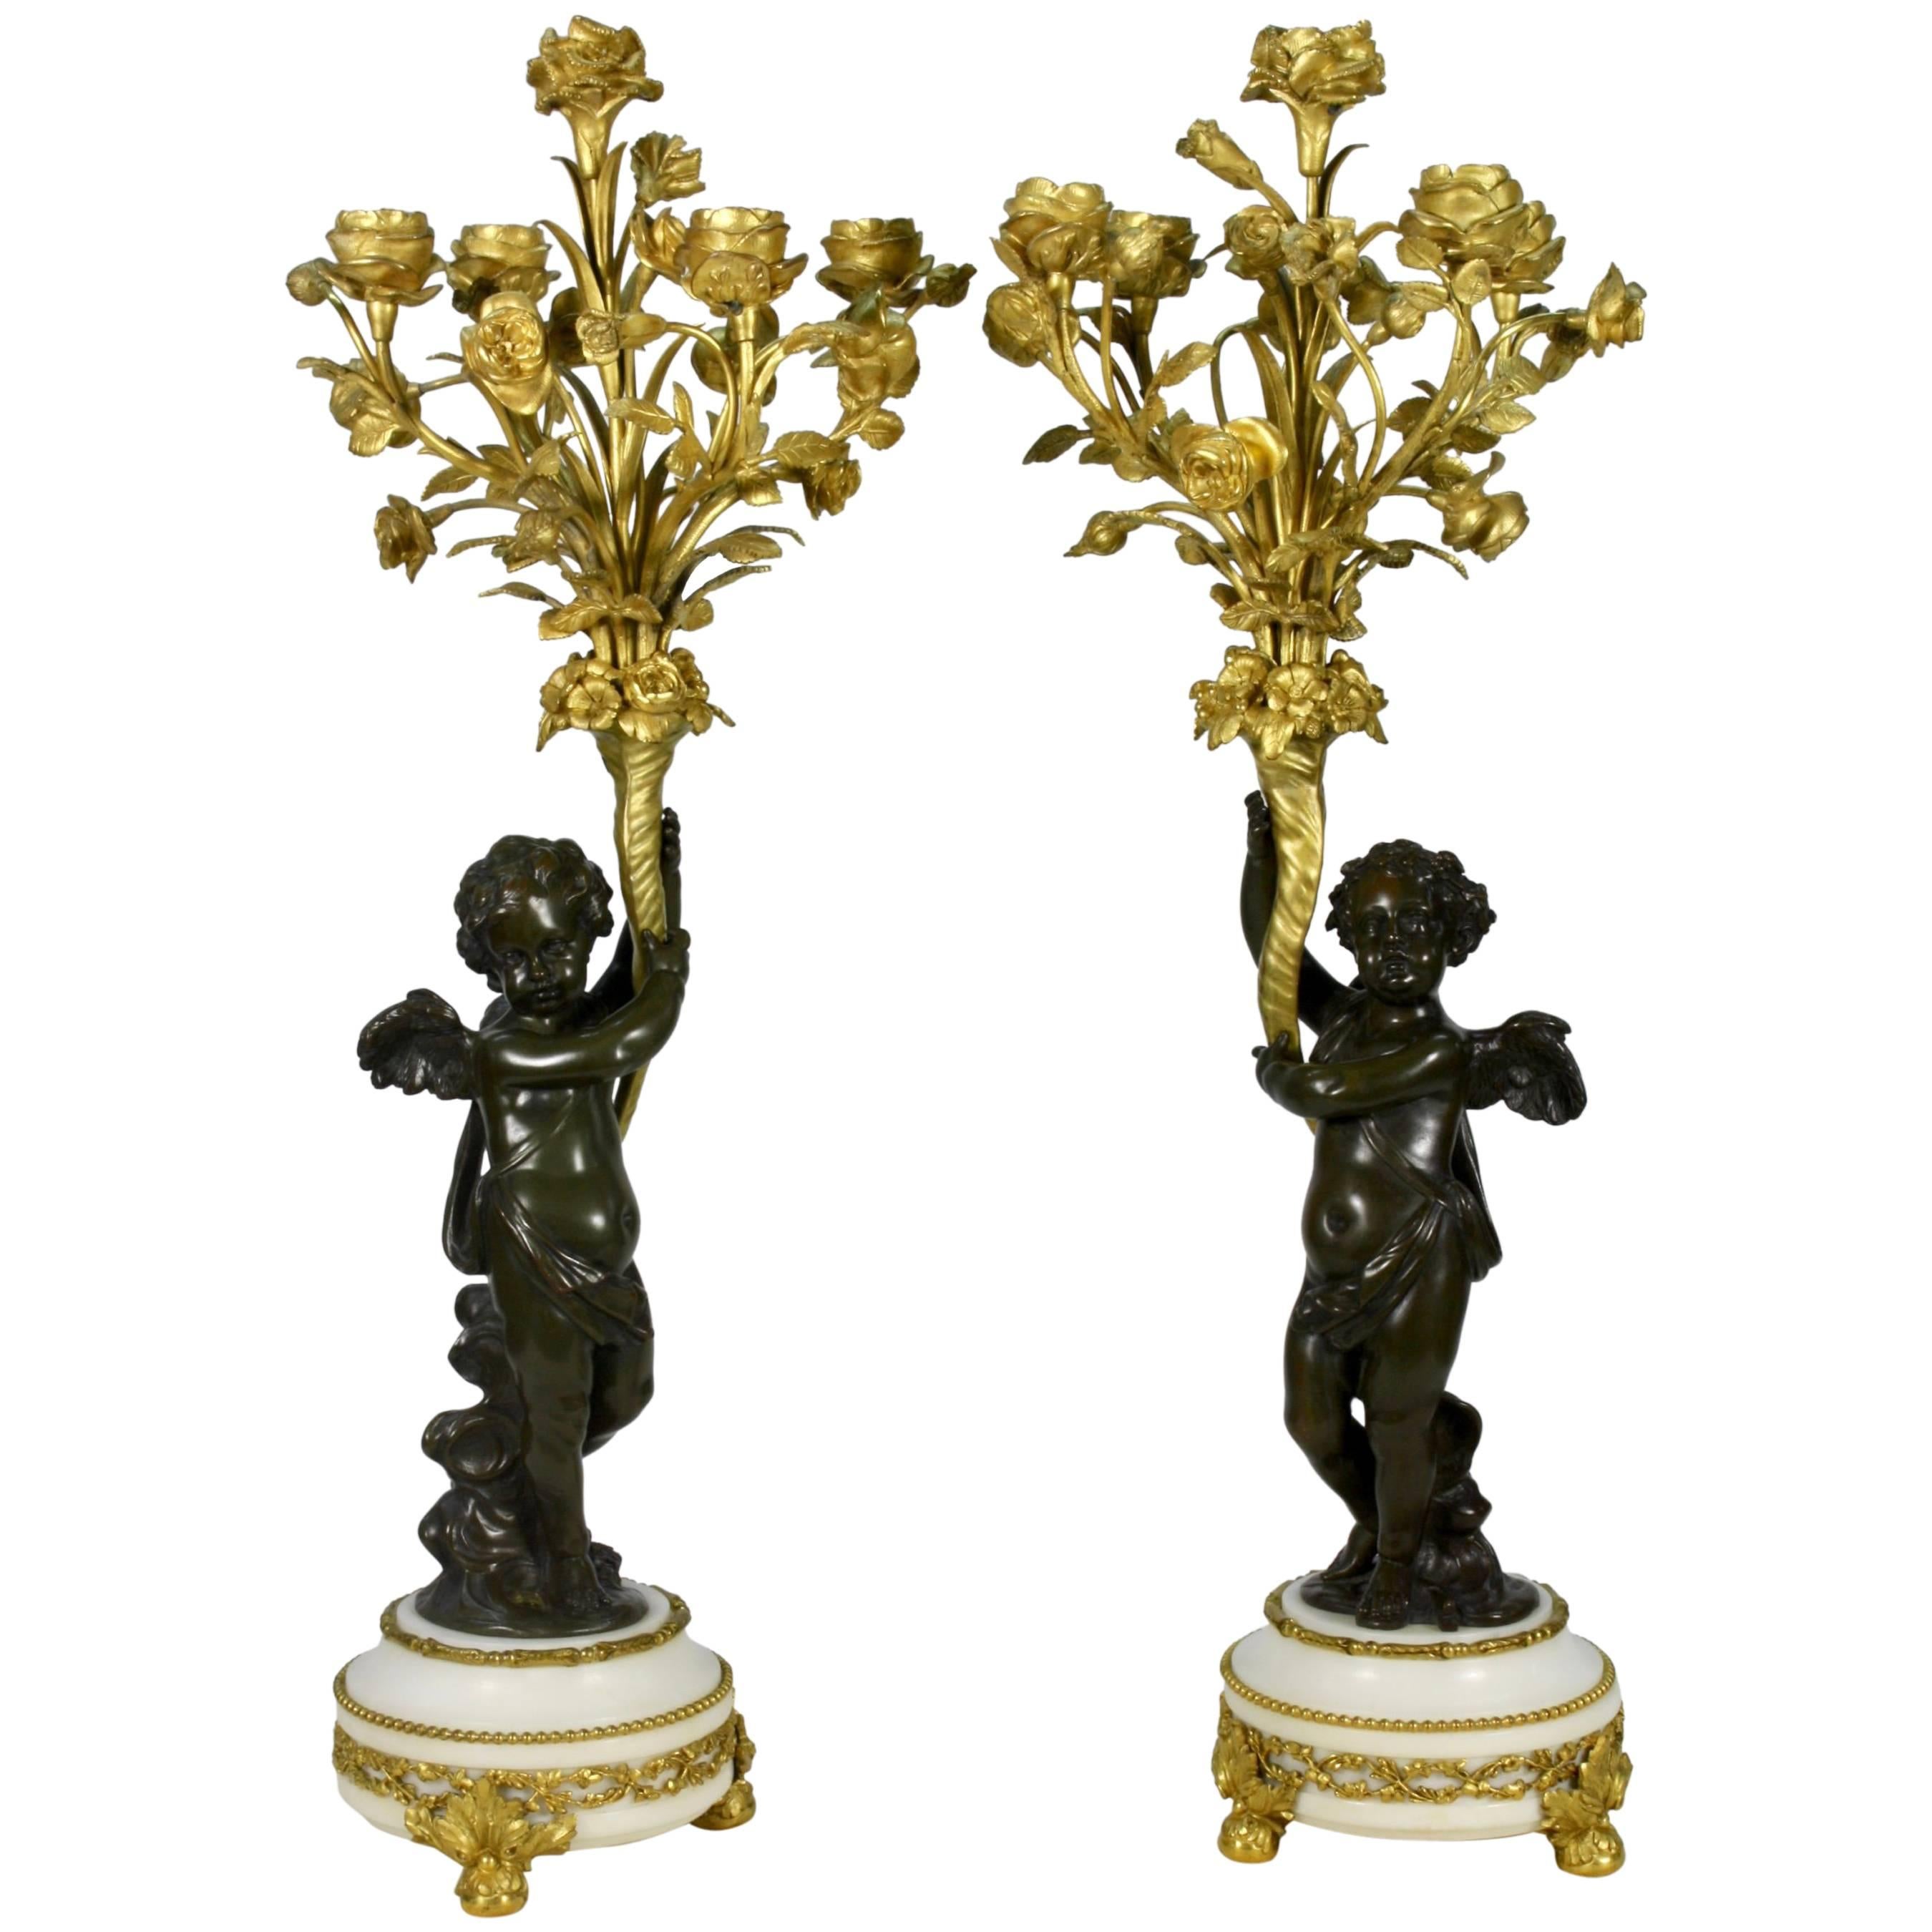 Pair of Gilt and Patinated Bronze Candelabra with Putti Holding Floral Bouquets